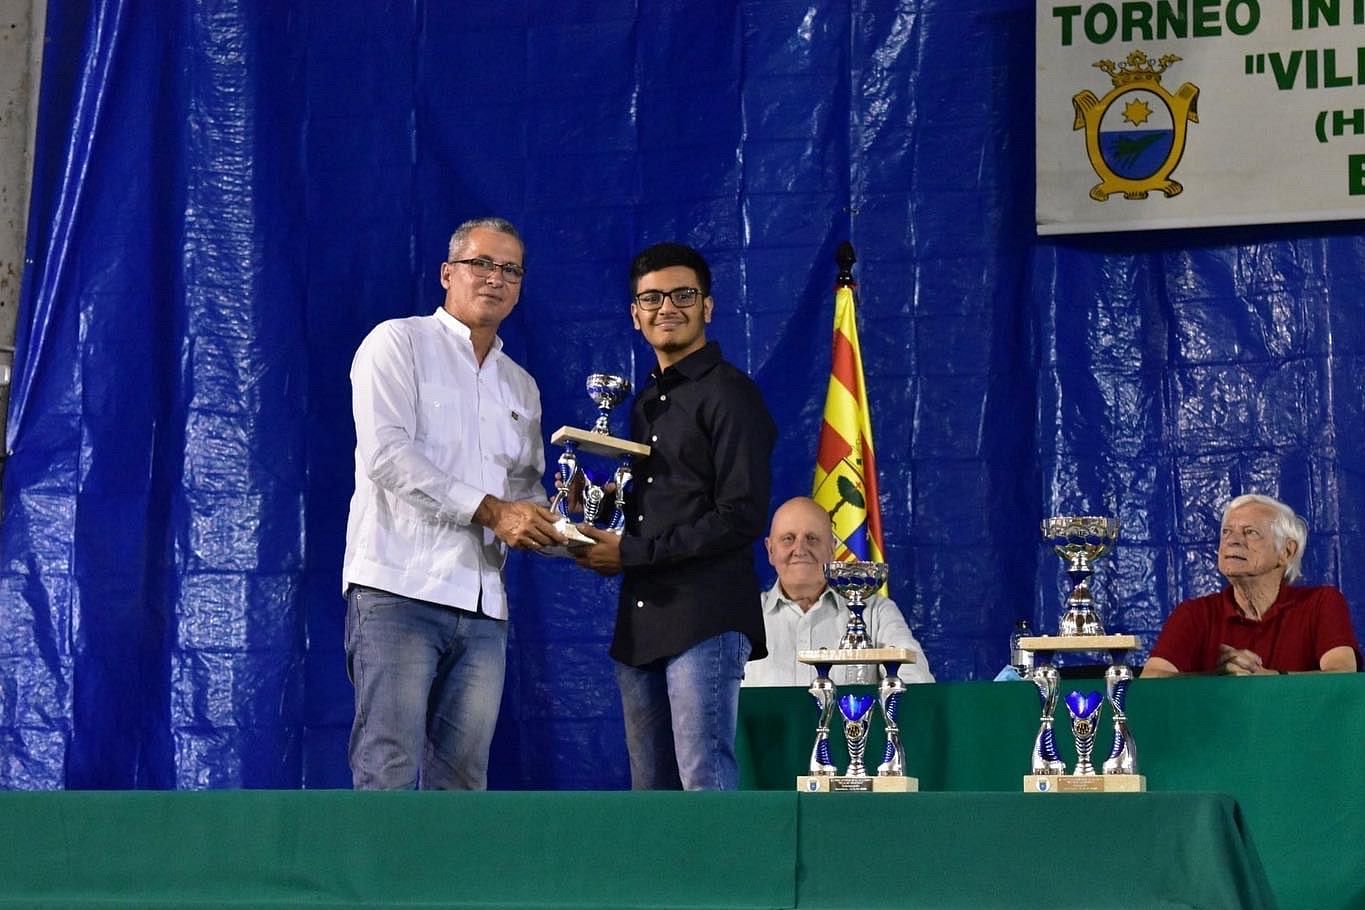 16-year-old Indian Grandmaster Raunak Sadhwani of Nagpur receiving the trophy from the chief guest in Spain on Friday. (Pic credit: Heena Sadhwani)